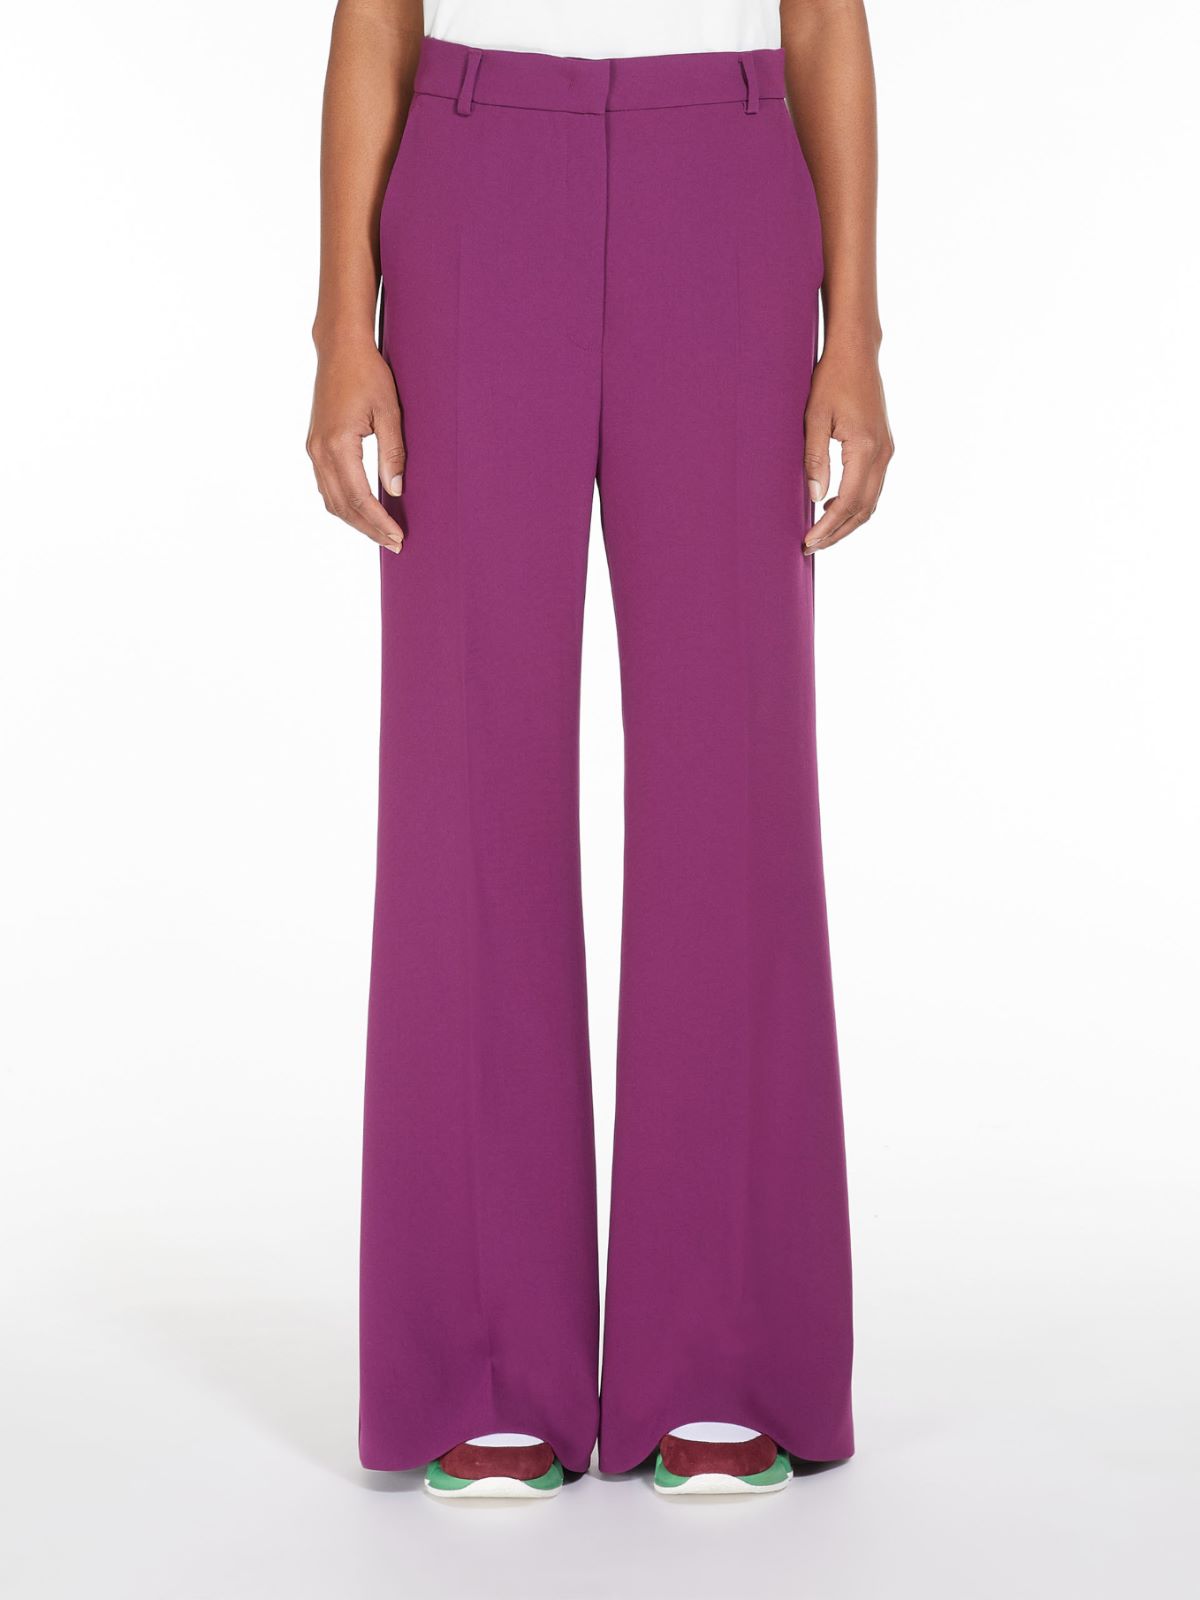 Bell bottom trousers in cady - BORDEAUX - Weekend Max Mara - 2